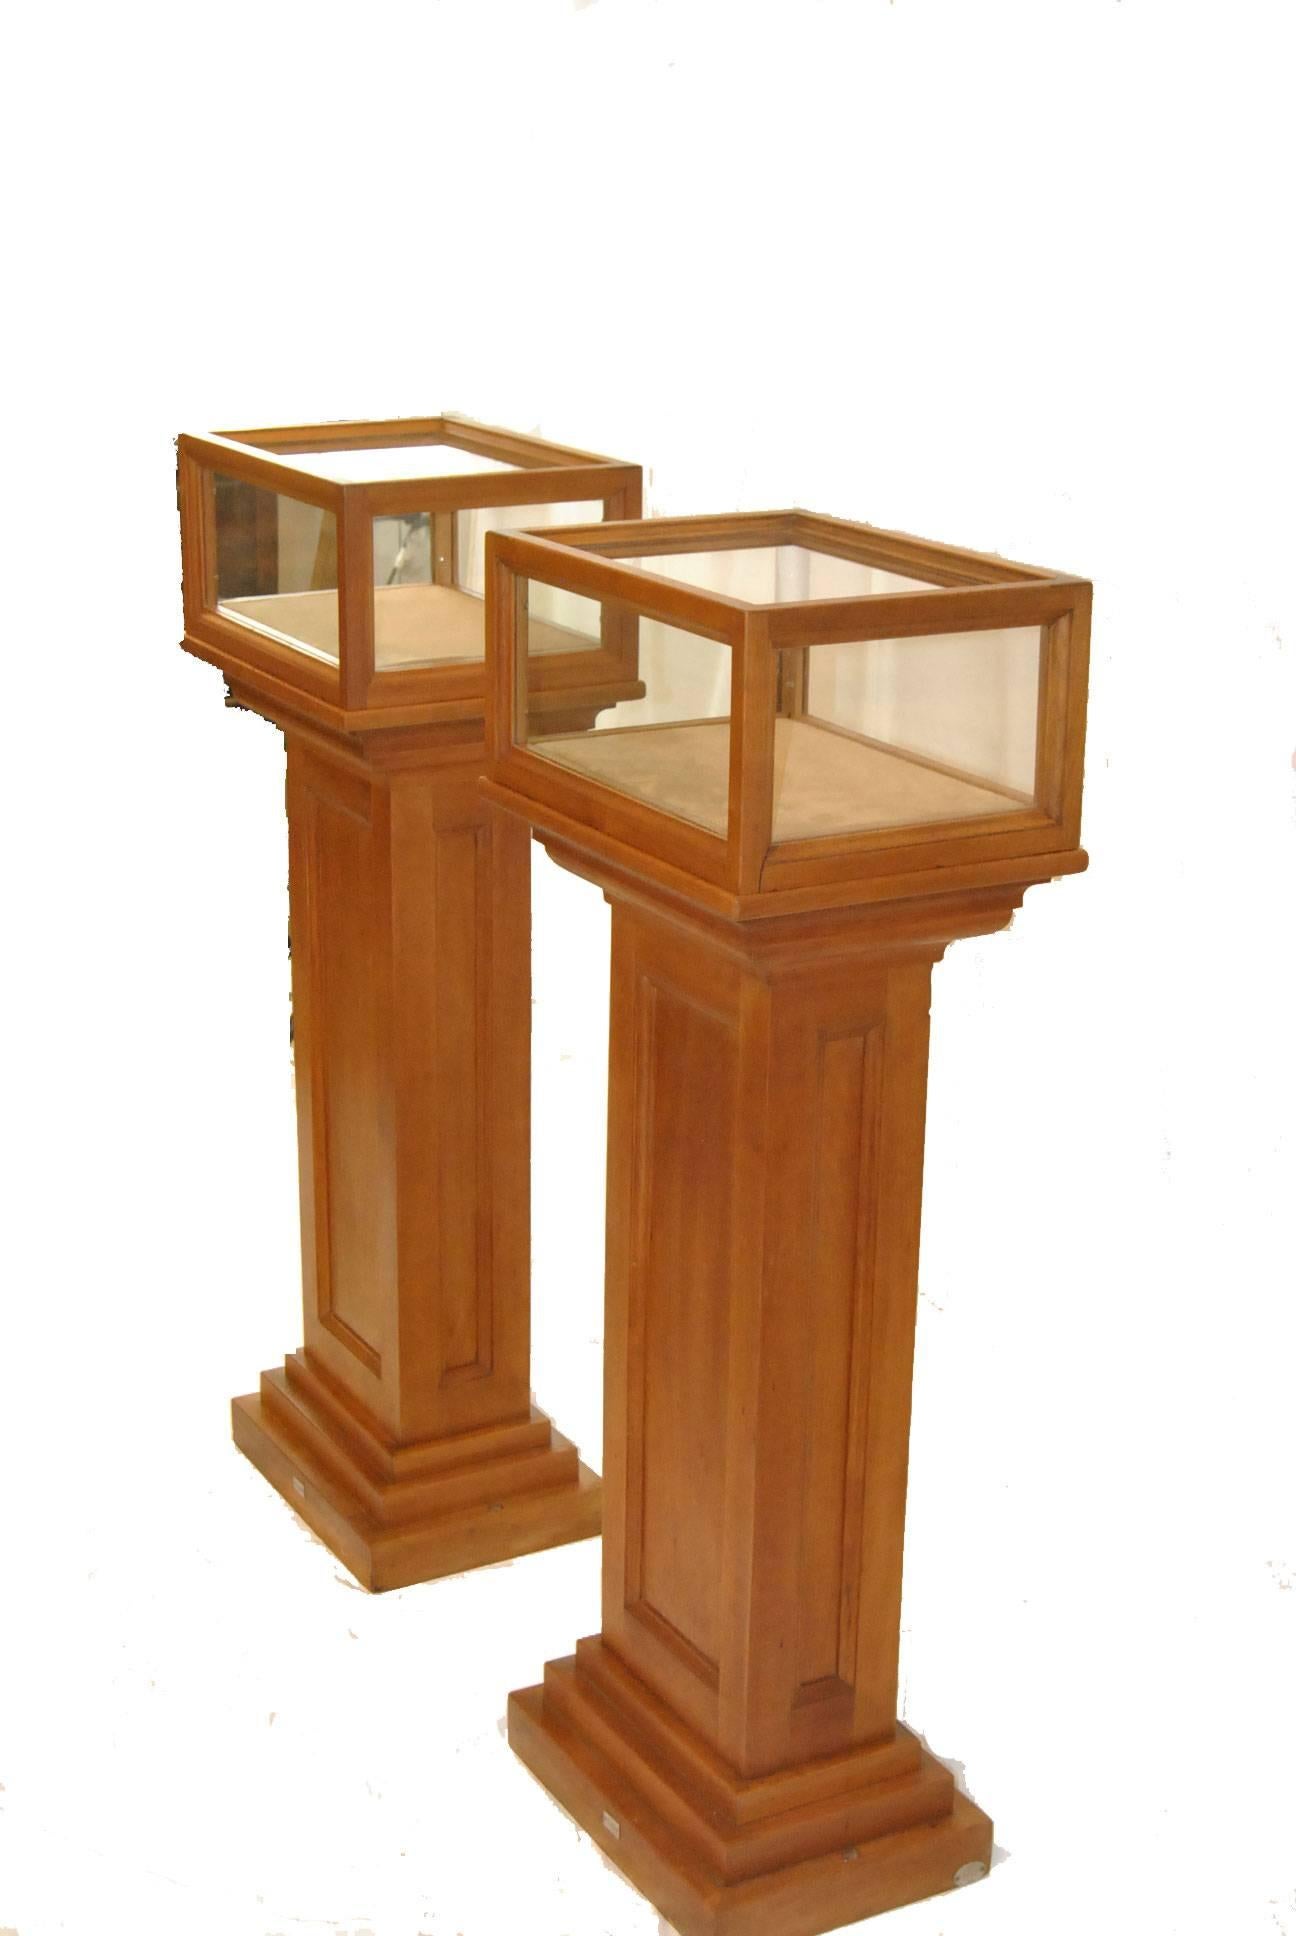 A very handsome pair of display pedestals, circa 1920s. This pair was decomissioned from the Toledo Museum of Art. Very heavy solid cheerywood with removable top glass boxes that can be screwed from the bottom to secure to the stands. There are